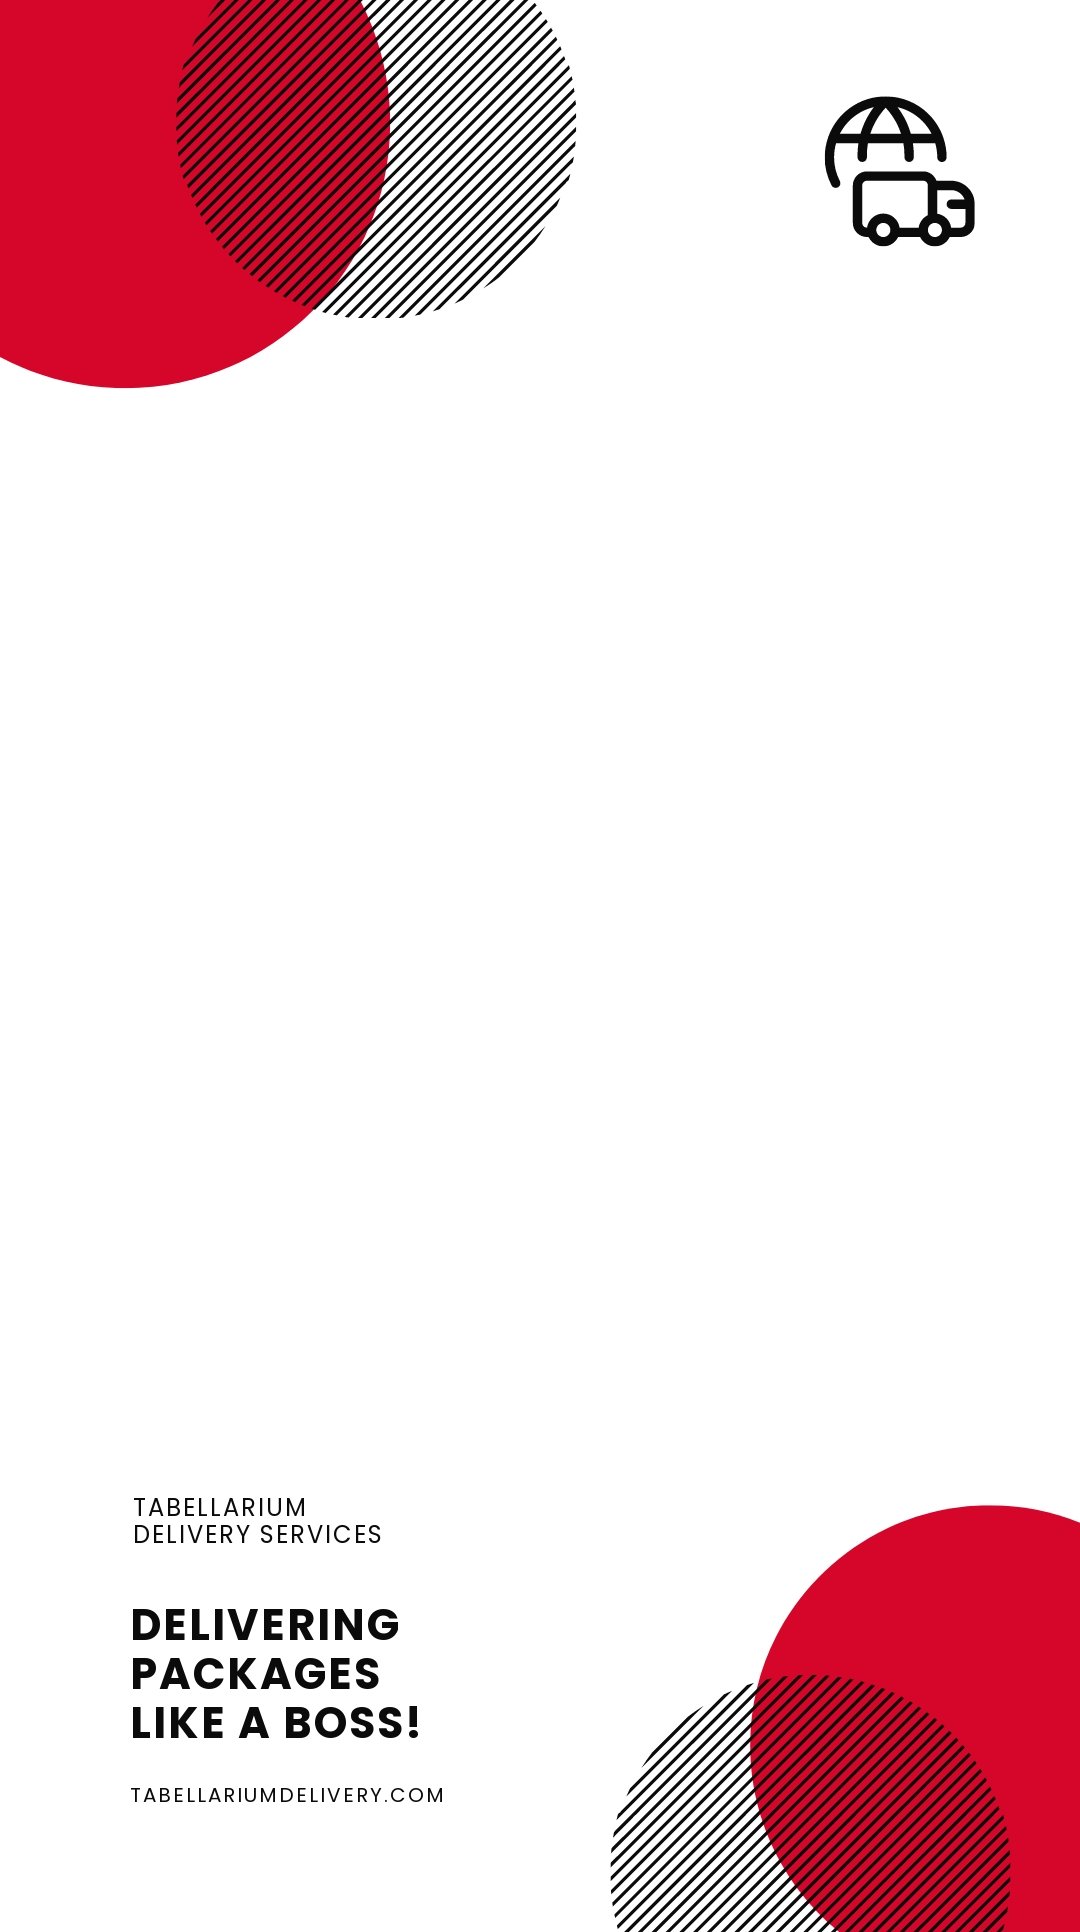 Home Delivery Snapchat Geofilter Template